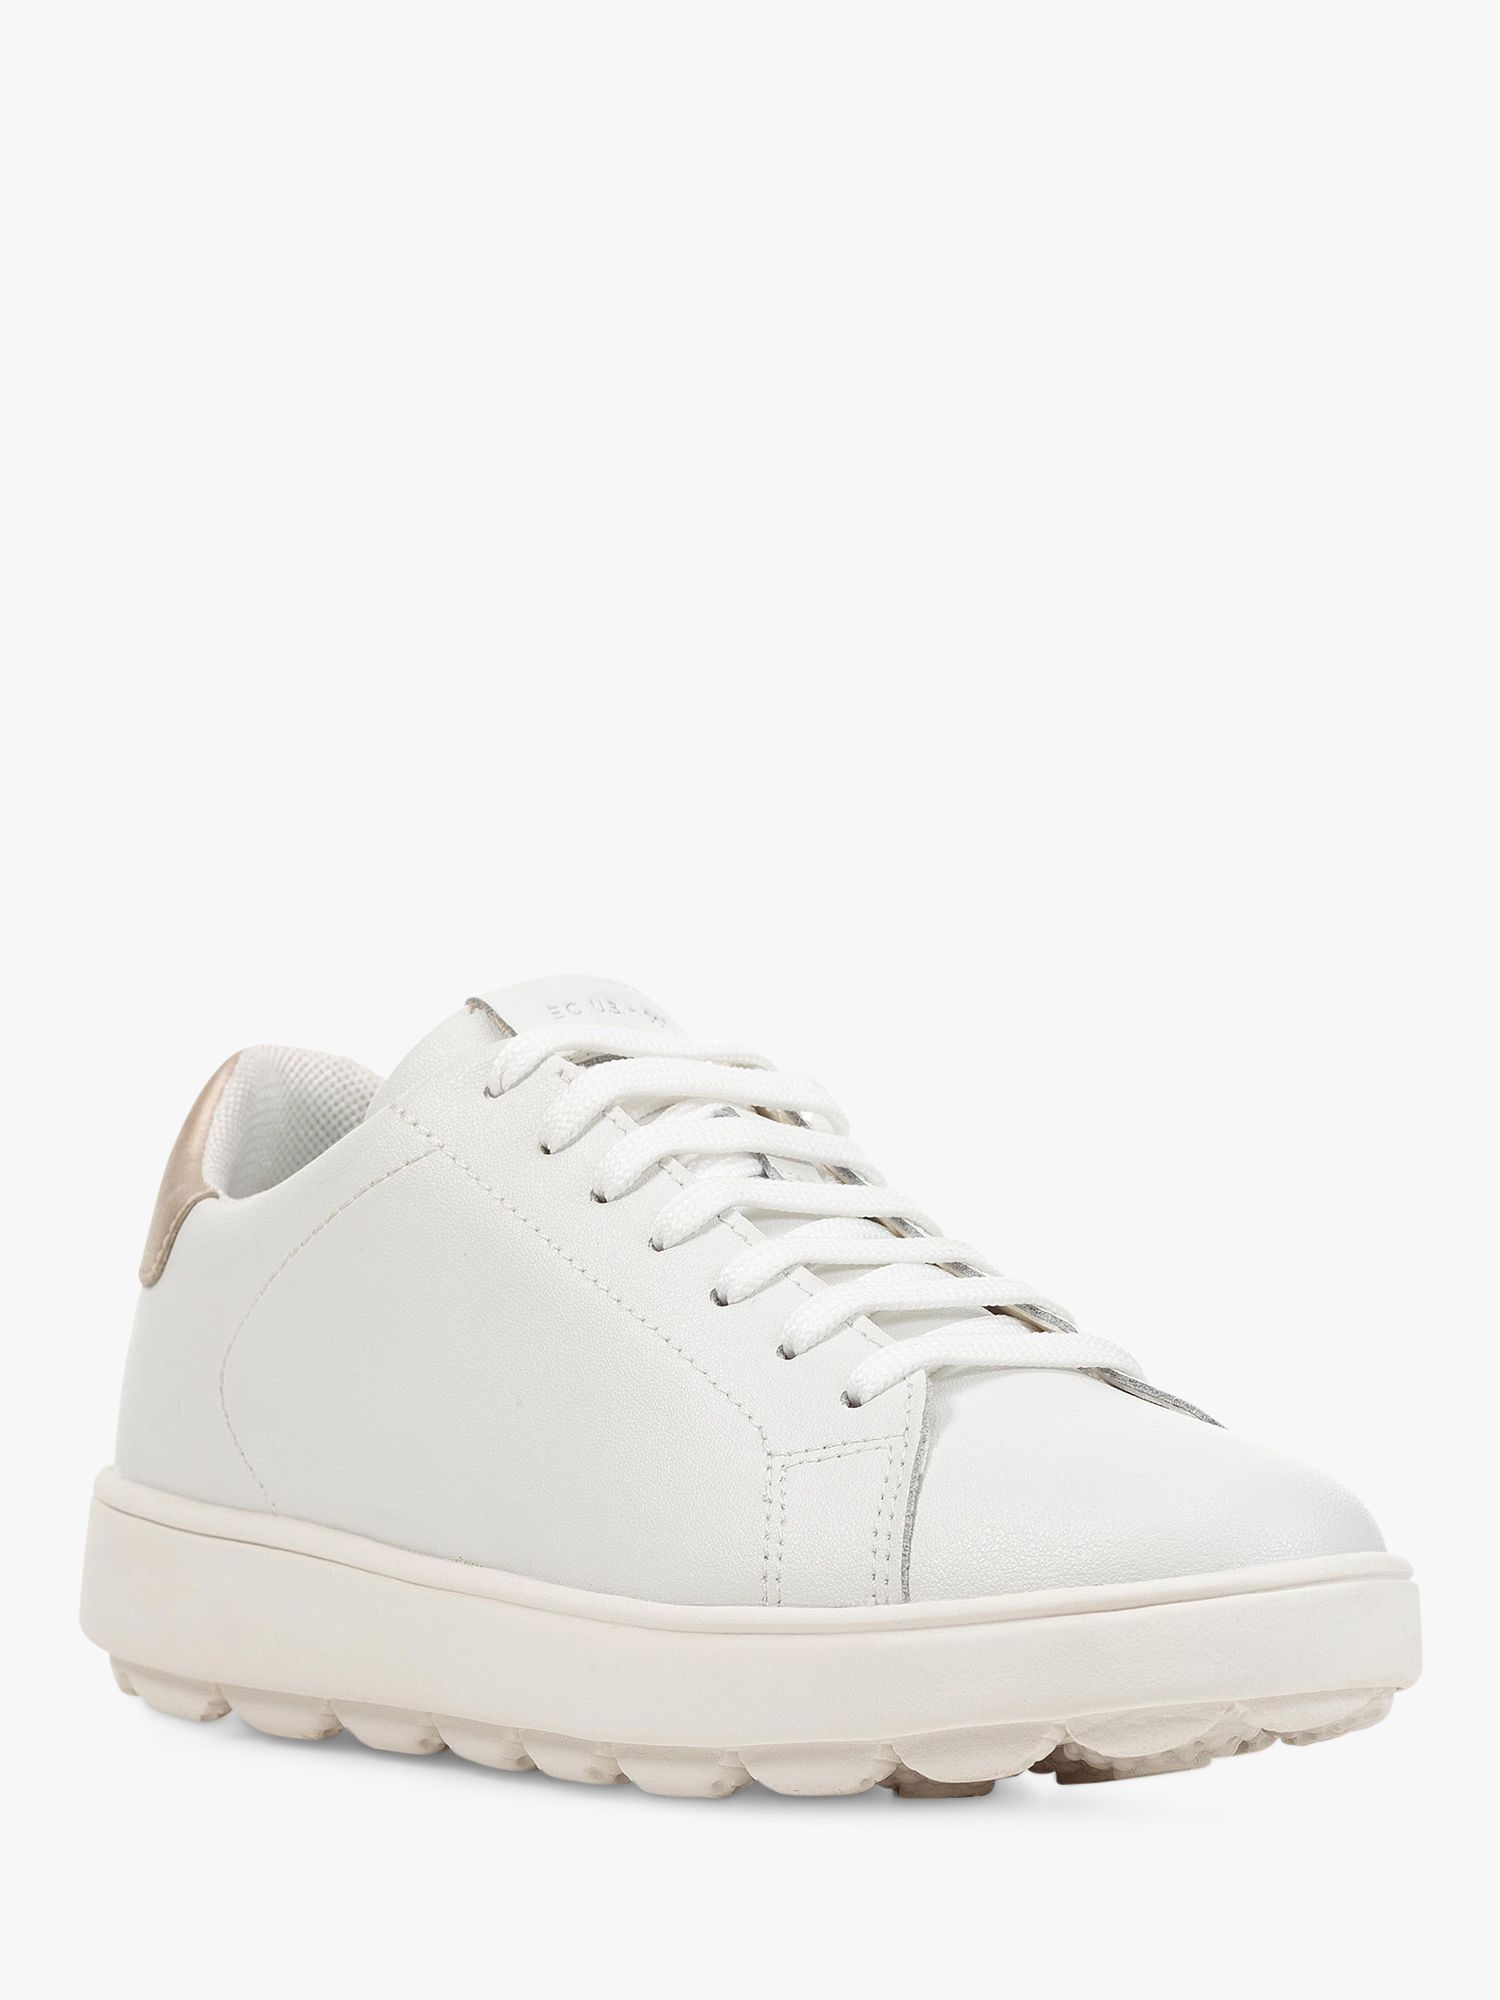 Buy Geox Spherica Ecub-1 Metallic Back Panel Leather Trainers, White/Gold Online at johnlewis.com